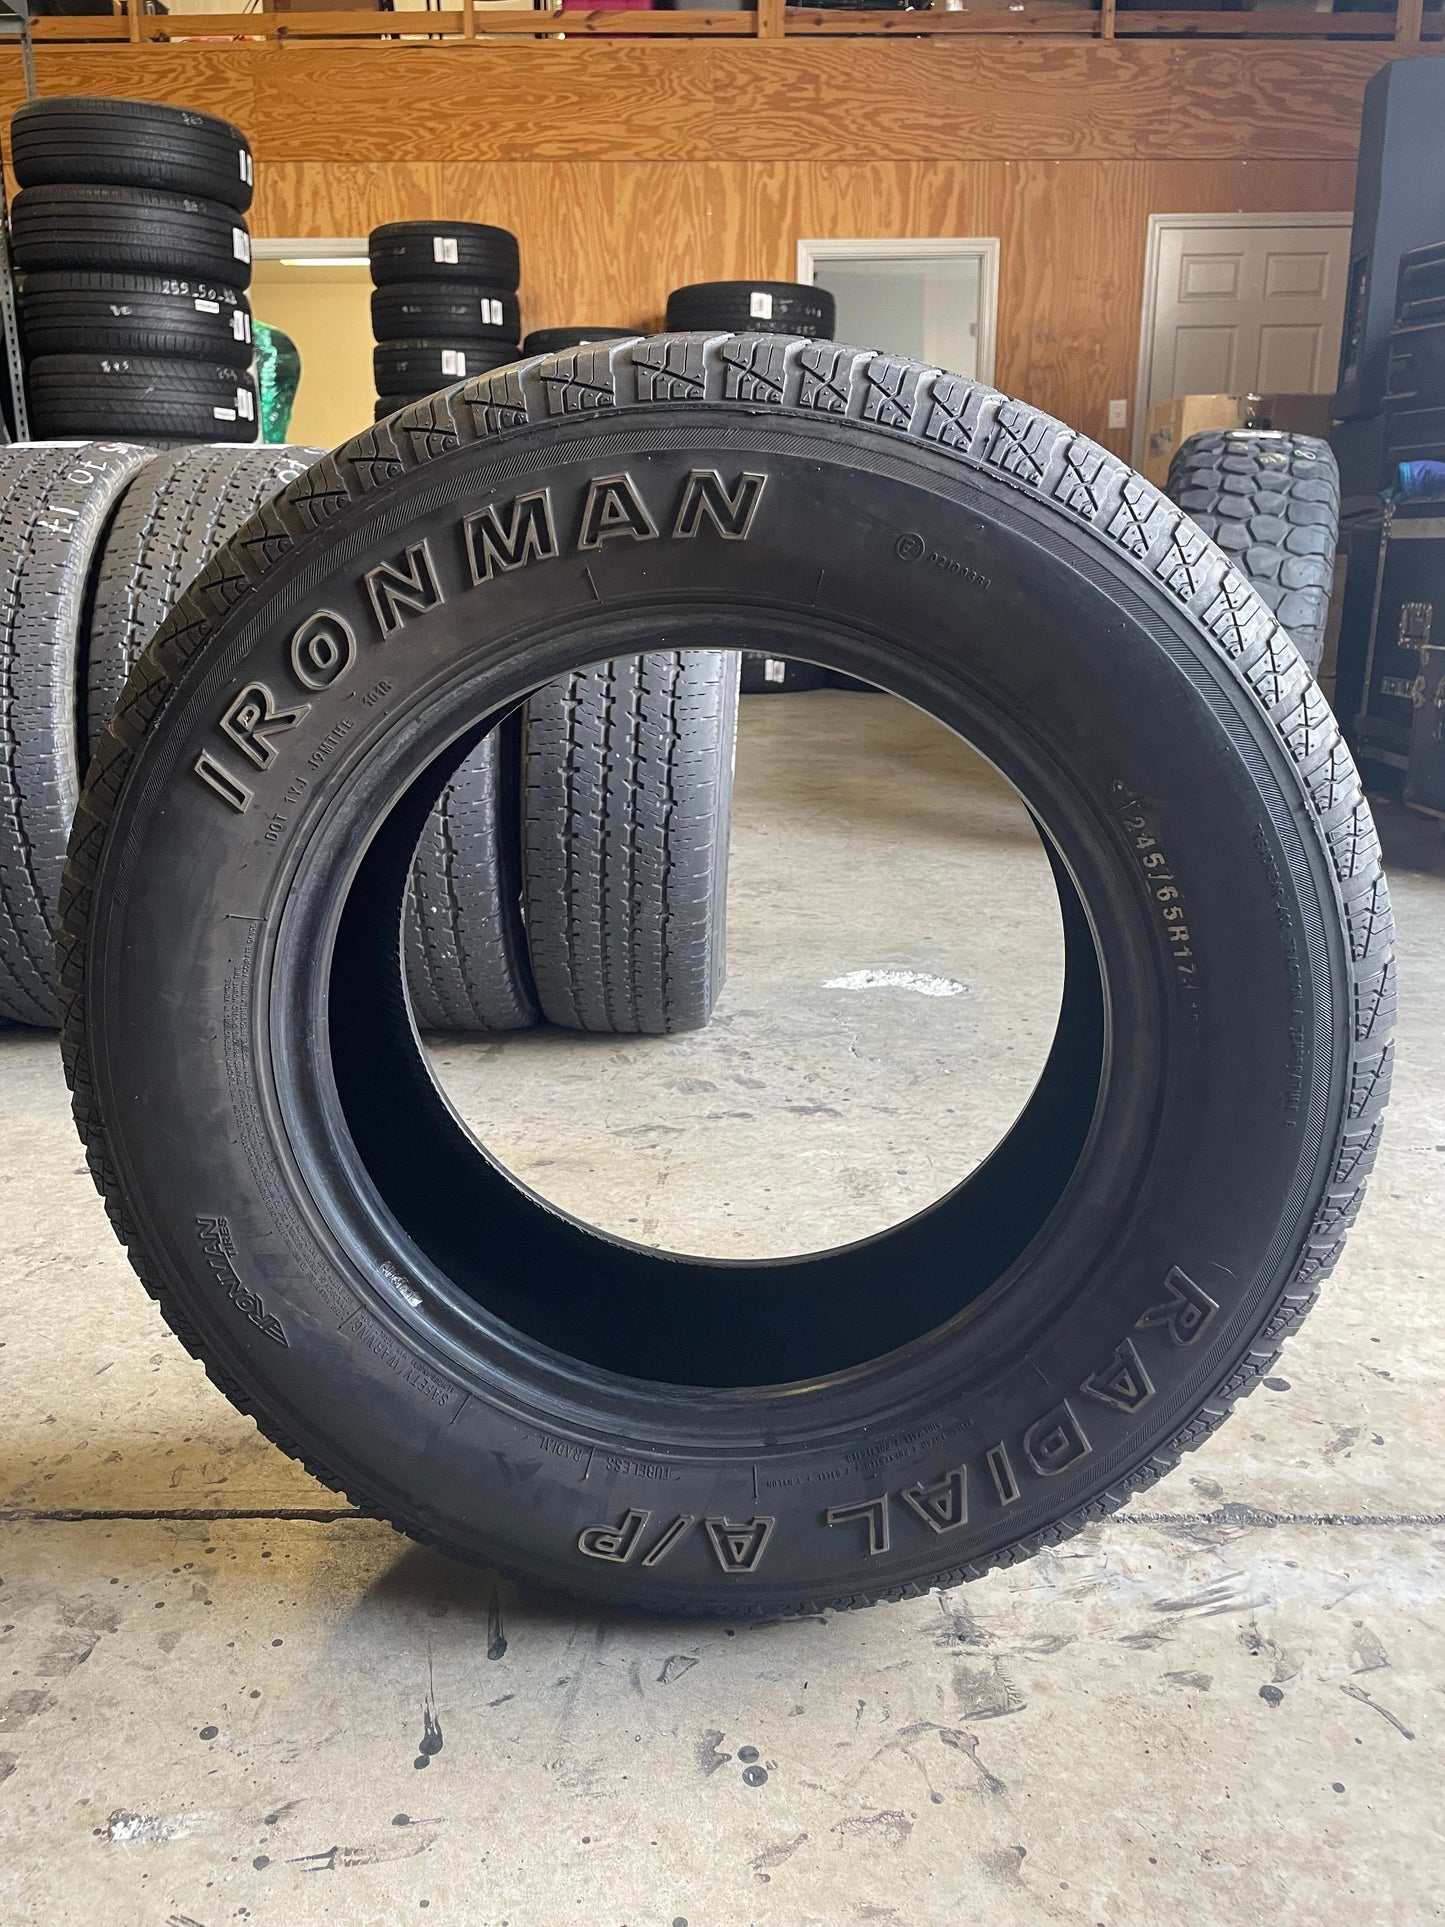 SINGLE 245/65R17 Ironman Radial A/P 107 T SL - Used Tires